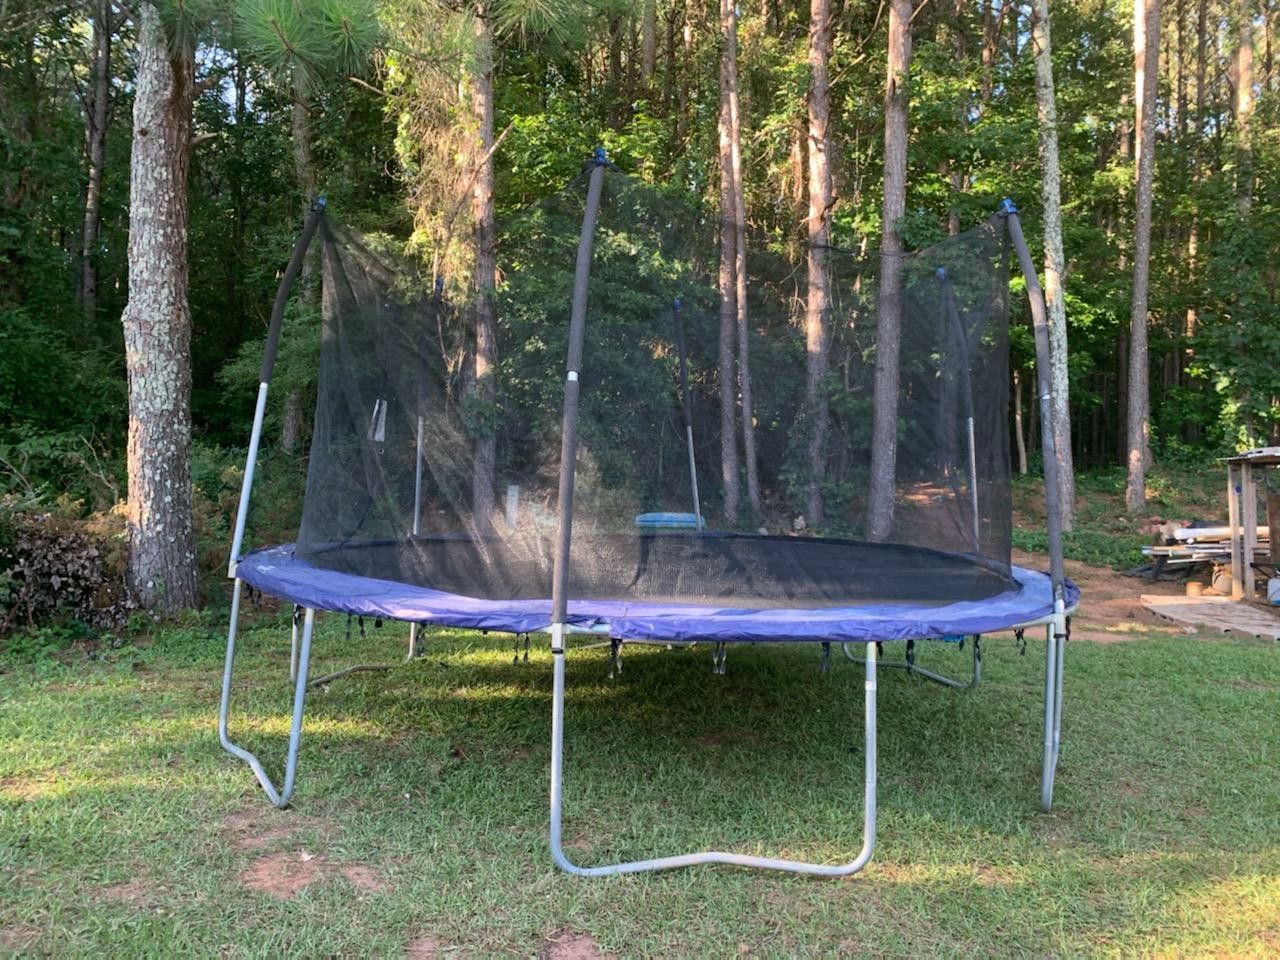 15 foot large trampoline in good condition price $ 200 cash only [already disassembled ready to ride]